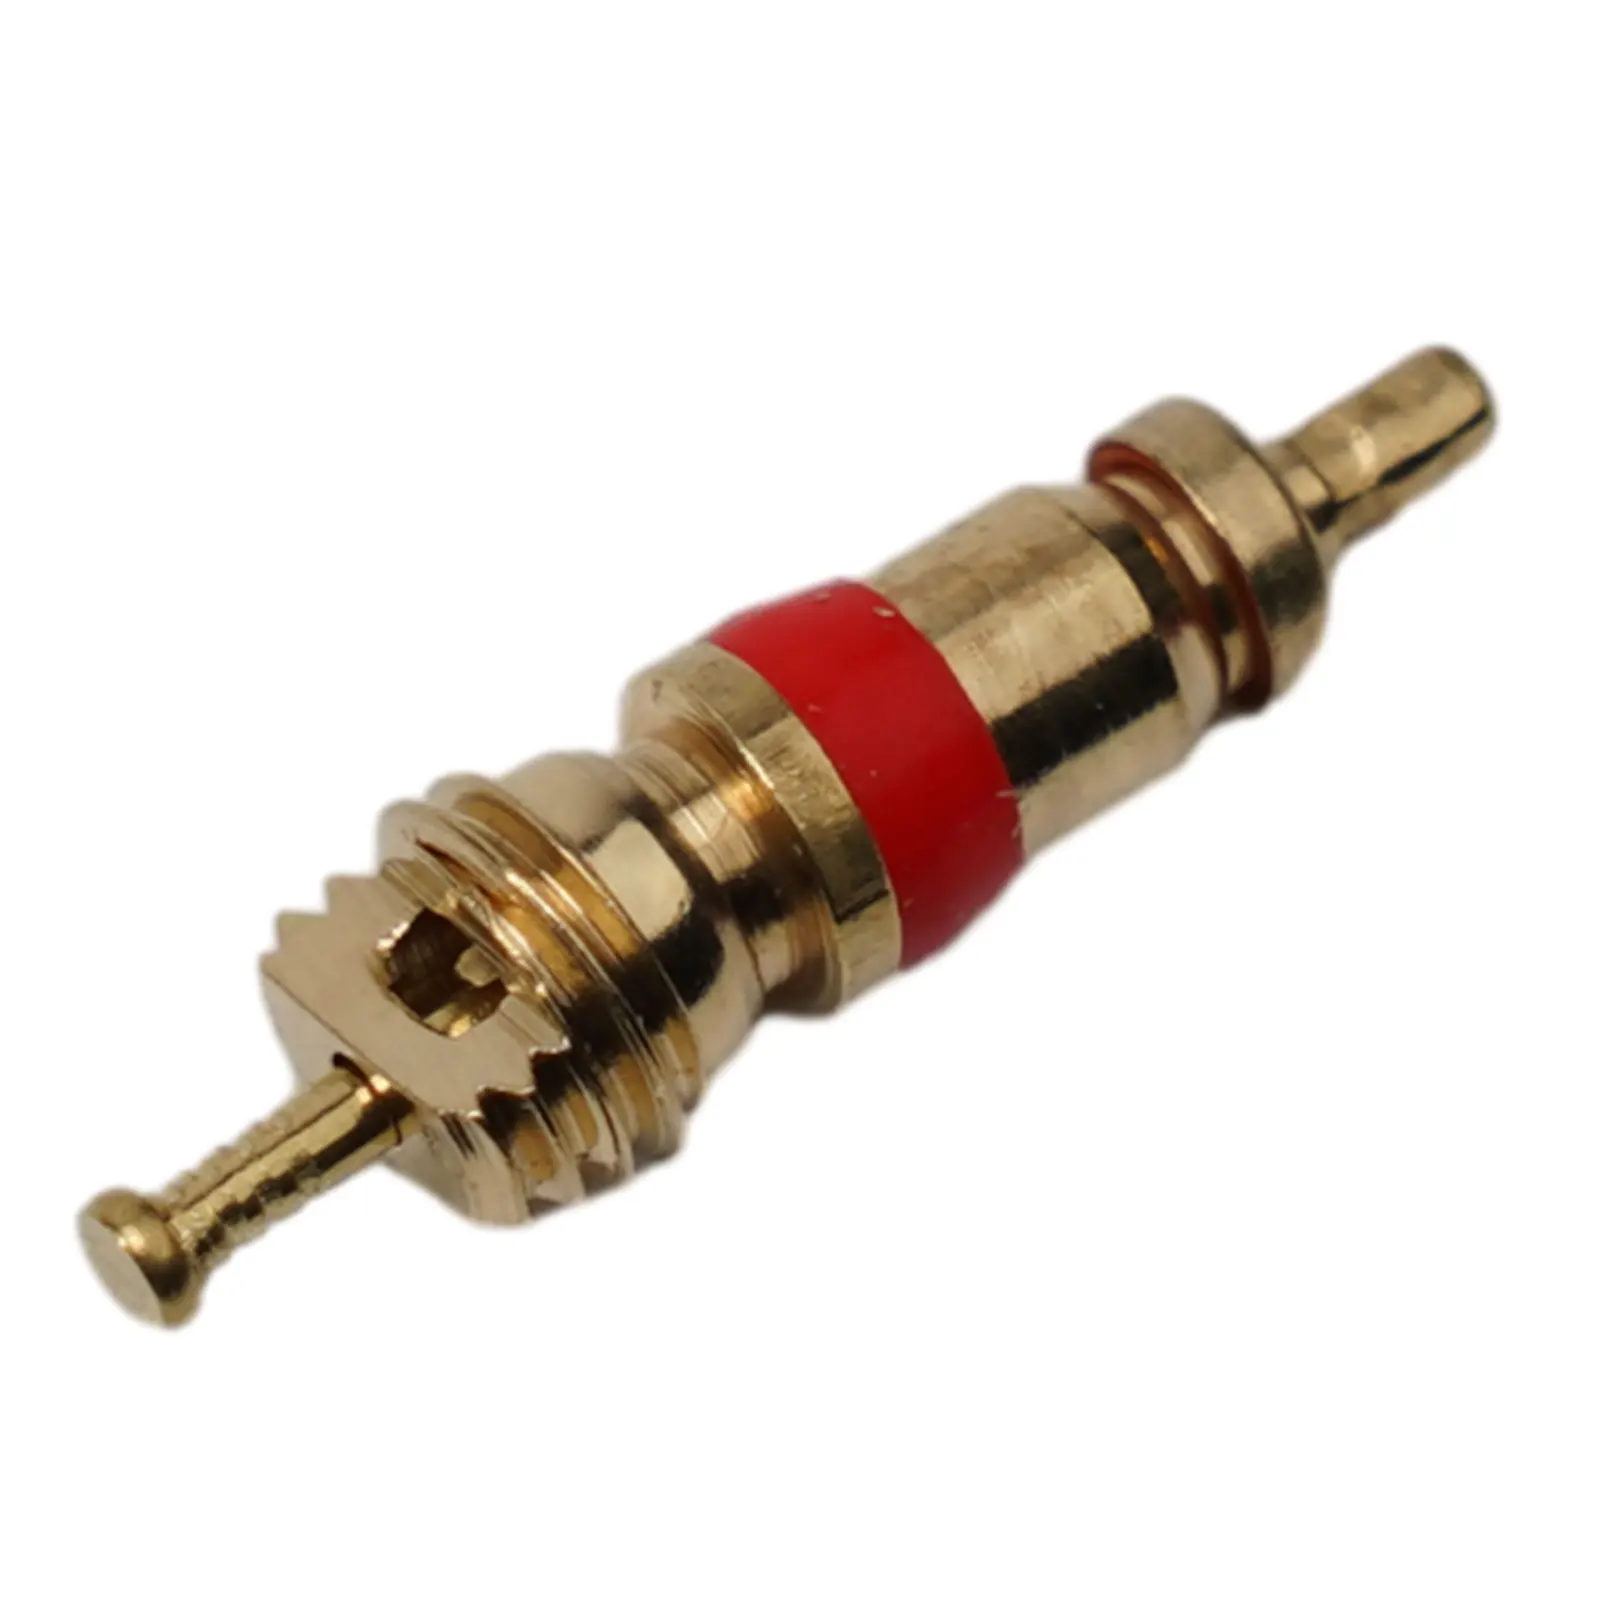 

Convenient Car Slotted Handle Tire Valve Stem Core Remover Screwdriver Kit Effortlessly Remove or Install Tire Valves